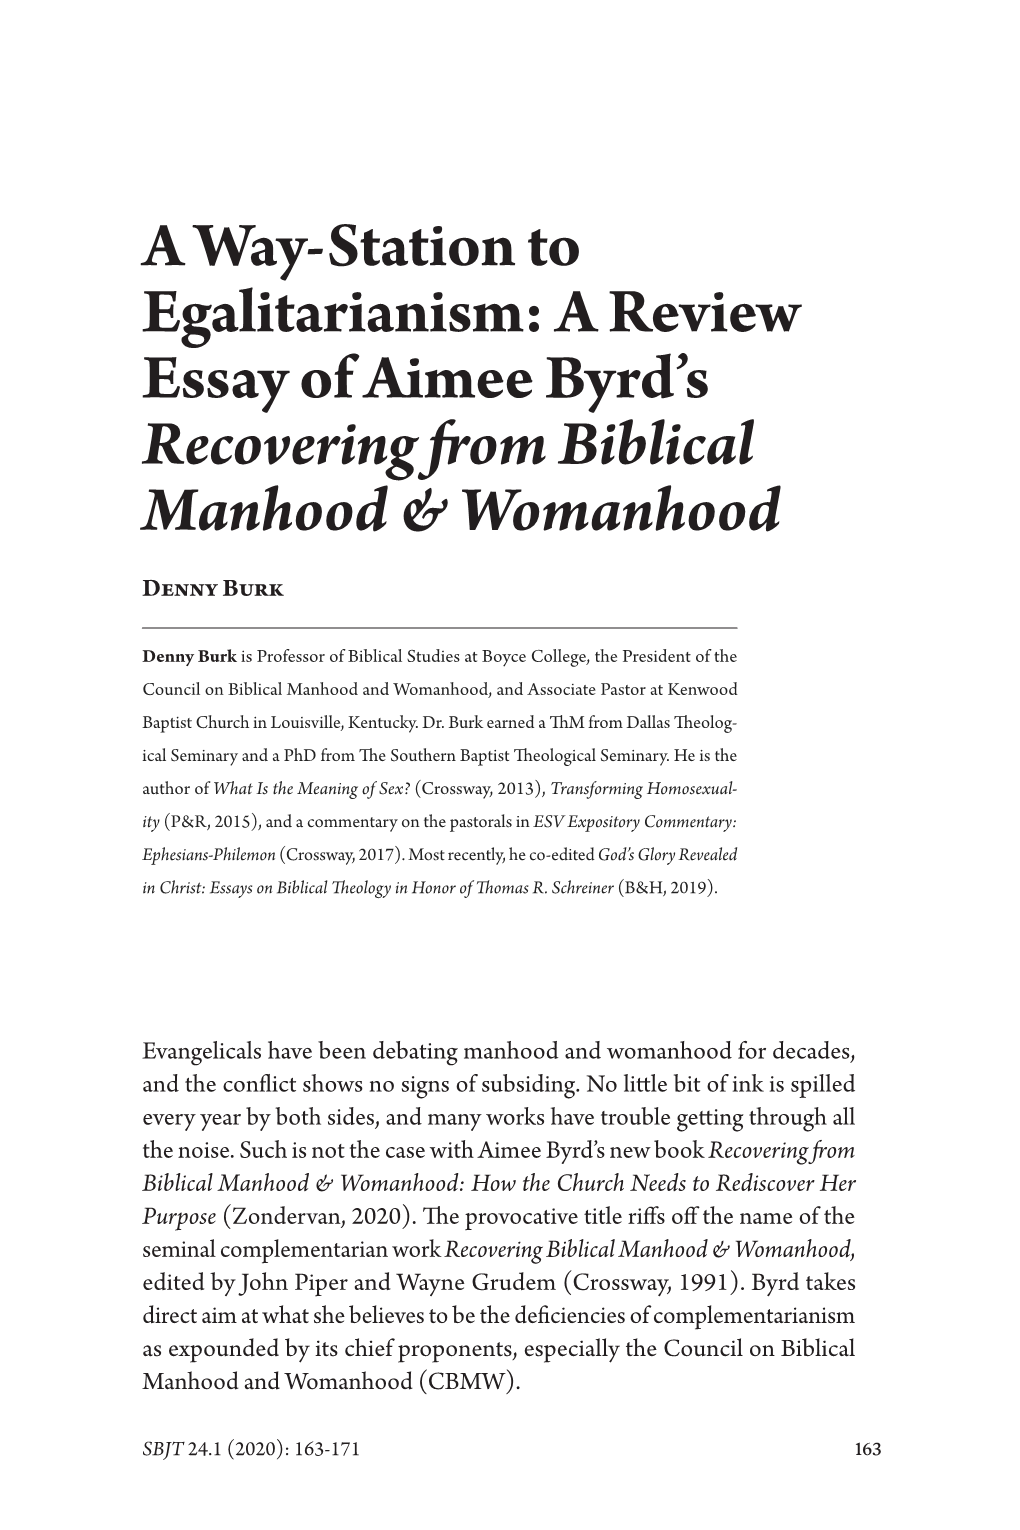 A Way-Station to Egalitarianism: a Review Essay of Aimee Byrd's Recovering from Biblical Manhood & Womanhood